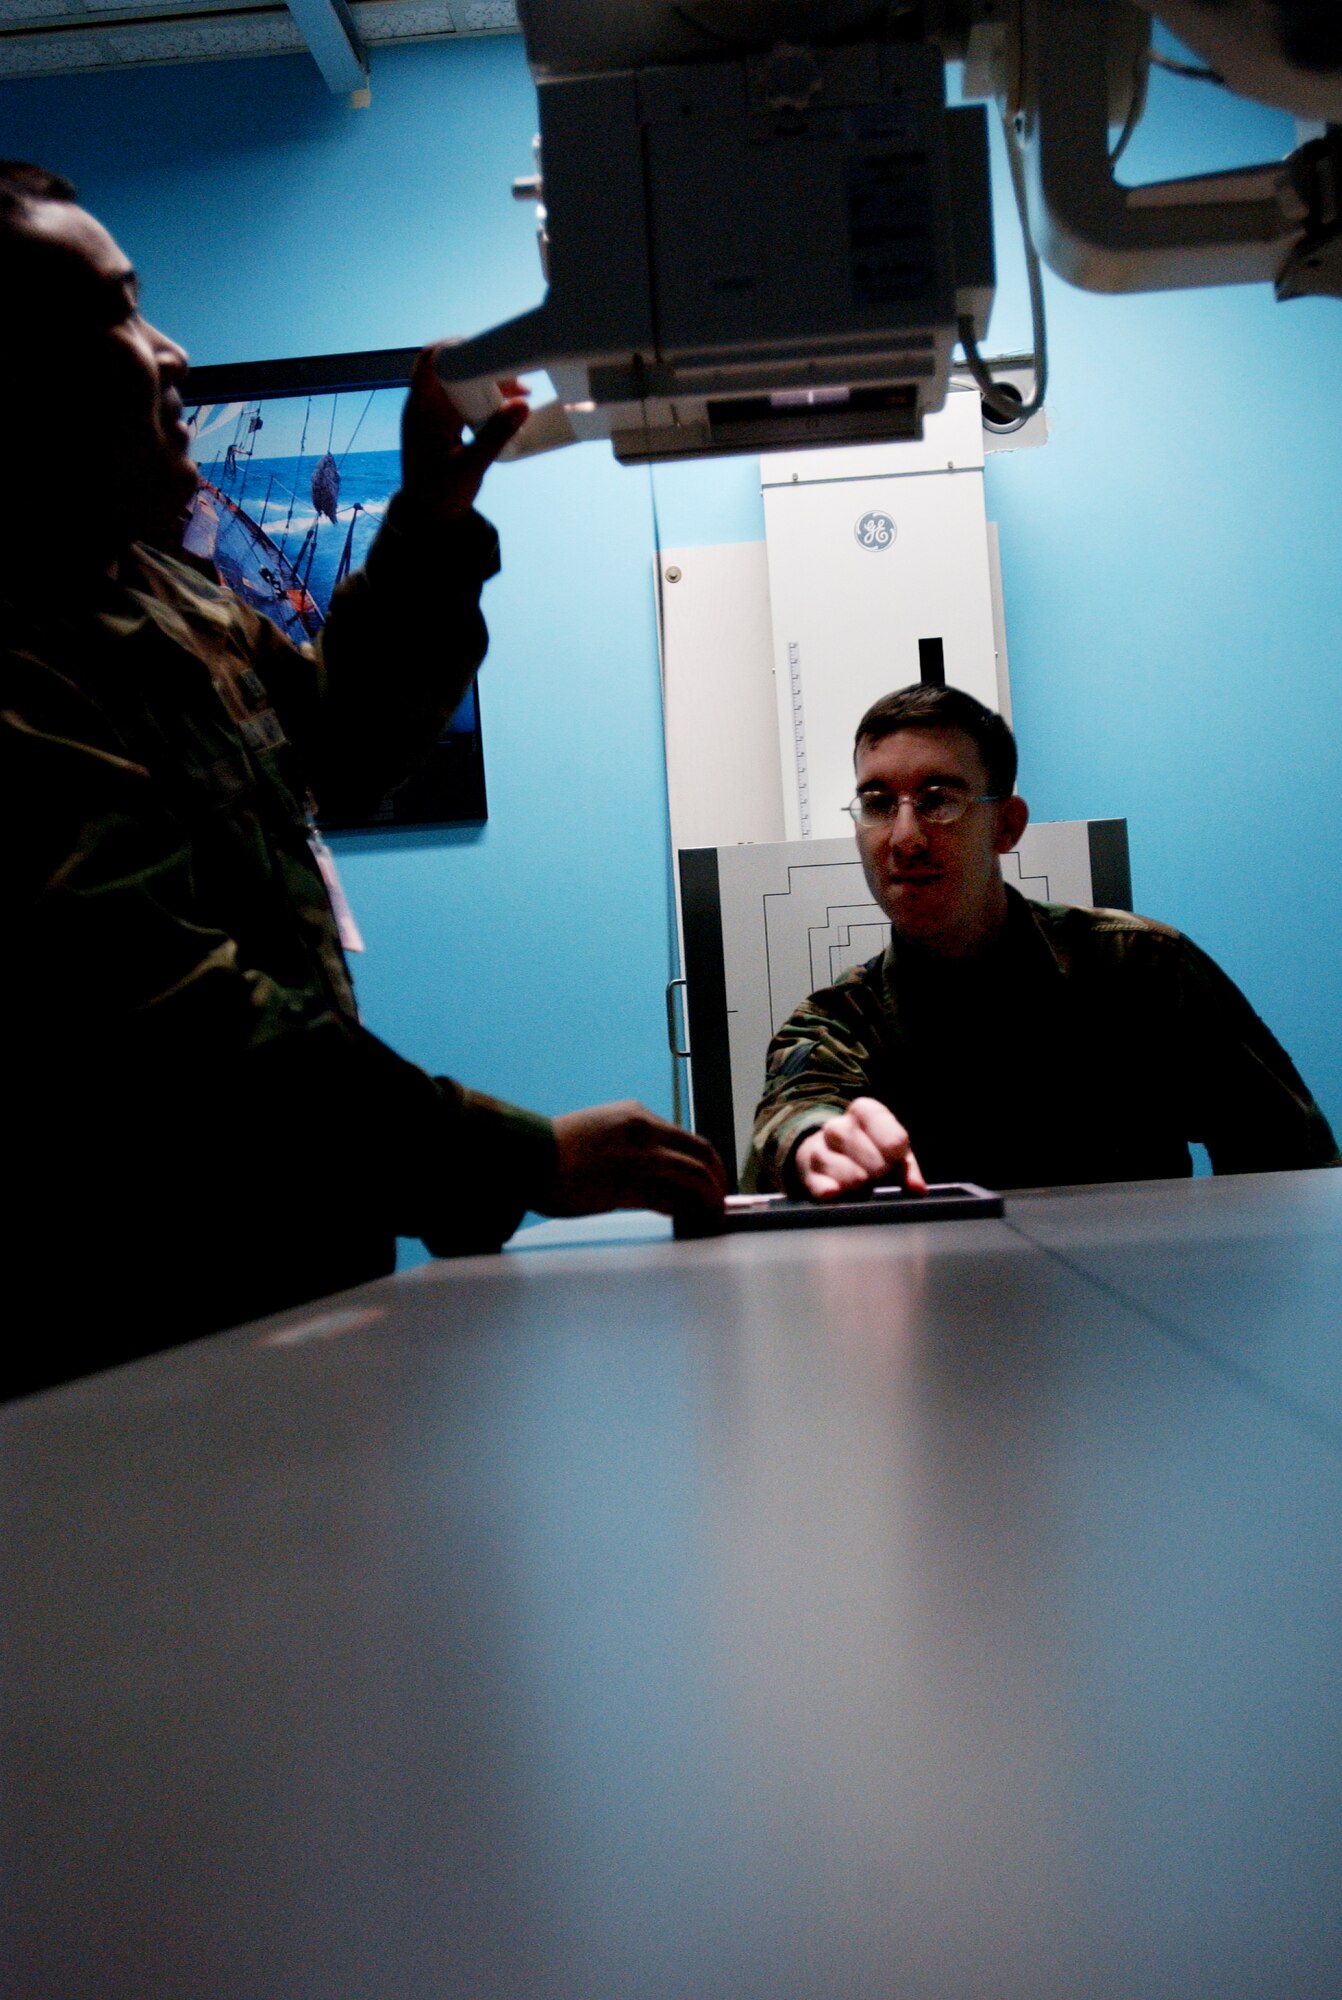 Diagnostic Imaging Technicians'  U.S Air Force Staff Sgt Rutherford Alejo (left) and Staff Sgt Joseph Moody (right) demonstrates how a hand and wrist is positioned before the hand is x-rayed using the anterior- posterior exposure here at Eielson Air Force Base, Alaska on Feb 5, 2008. The anterior-posterior x-ray exposure means the x-rays will pass through the patient from front to back.

(U.S Air Force photo by: Staff Sgt Eric T. Sheler)